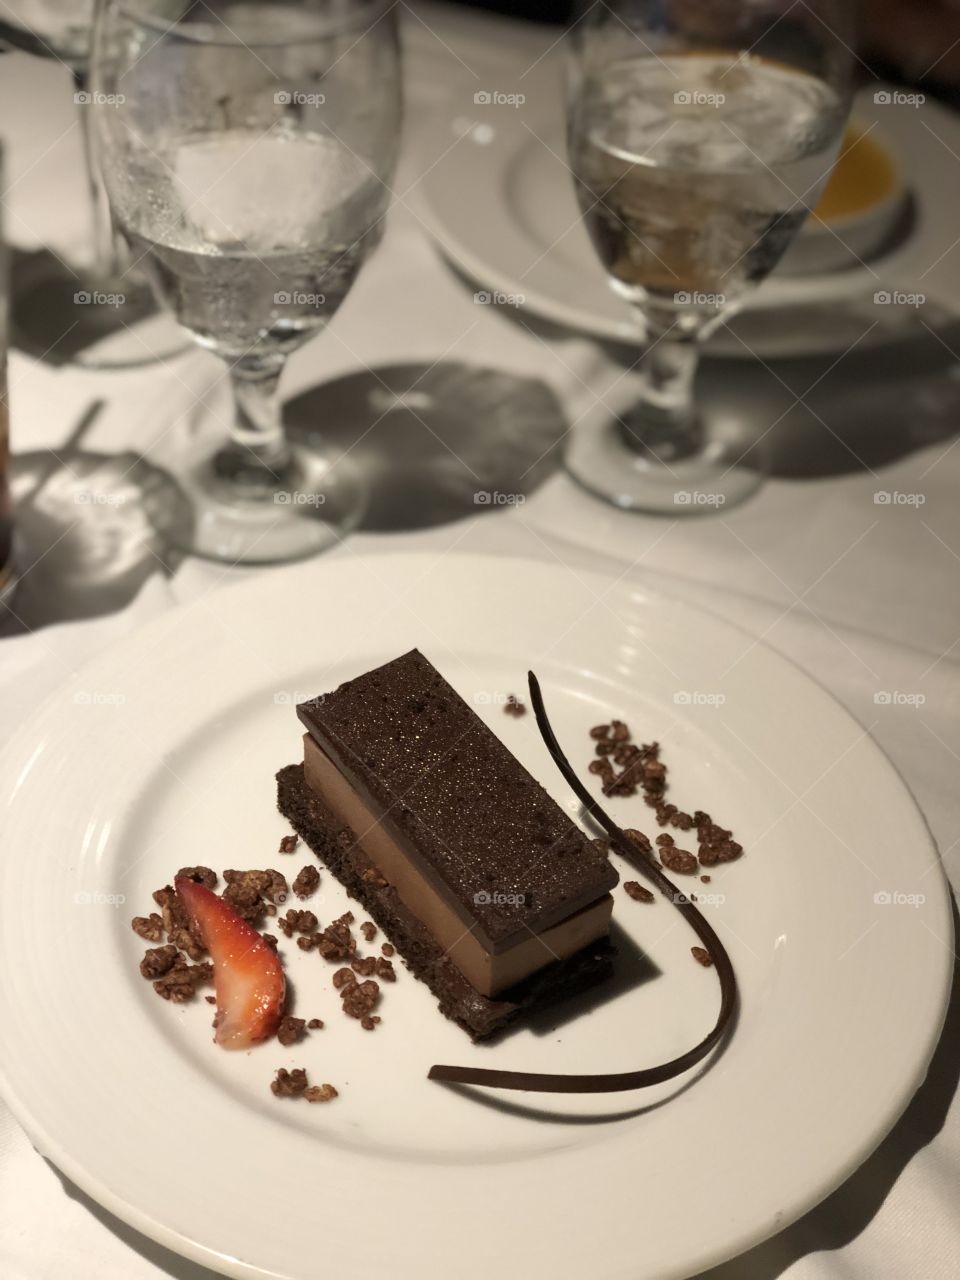 A chocolate desert during our Carnival Sunshine Cruise Vacation.